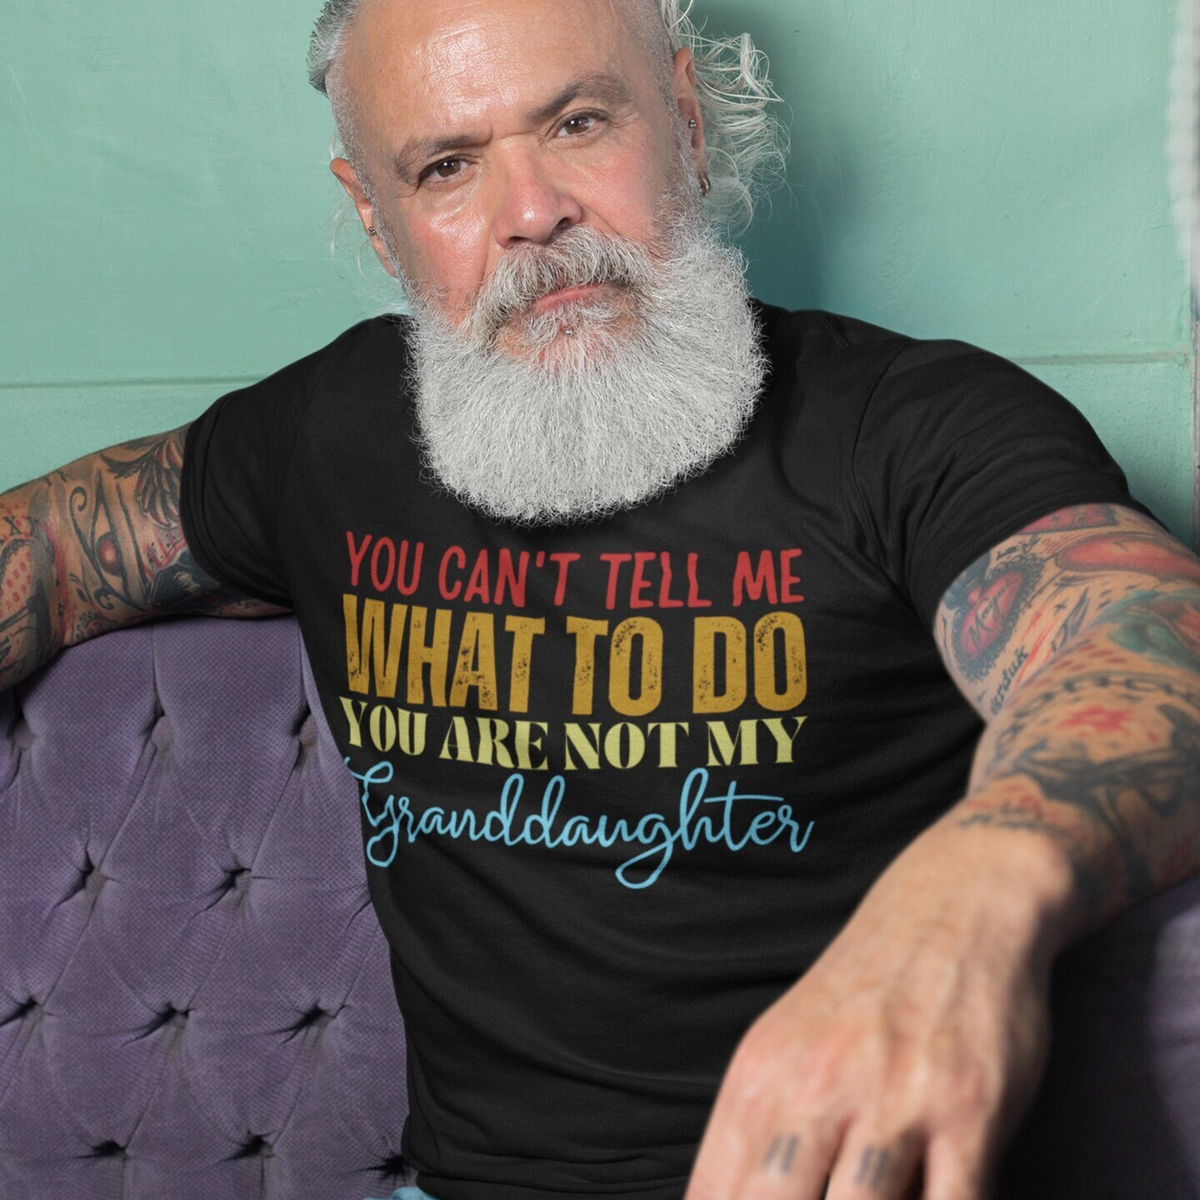 Granddad Shirt, Girl granddad shirt, Fathers Day Shirt, Funny Mens Shirt, Funny Granddad Shirt, Tell me what to do, Gift for him, Gift for her, New Papa Gift, Funny grandma Shirt, grandmother Shirt, New grandfather Shirt, granddaddy Shirt, papa tee, You Can't tell me What To Do You Are Not My granddaughter Shirt